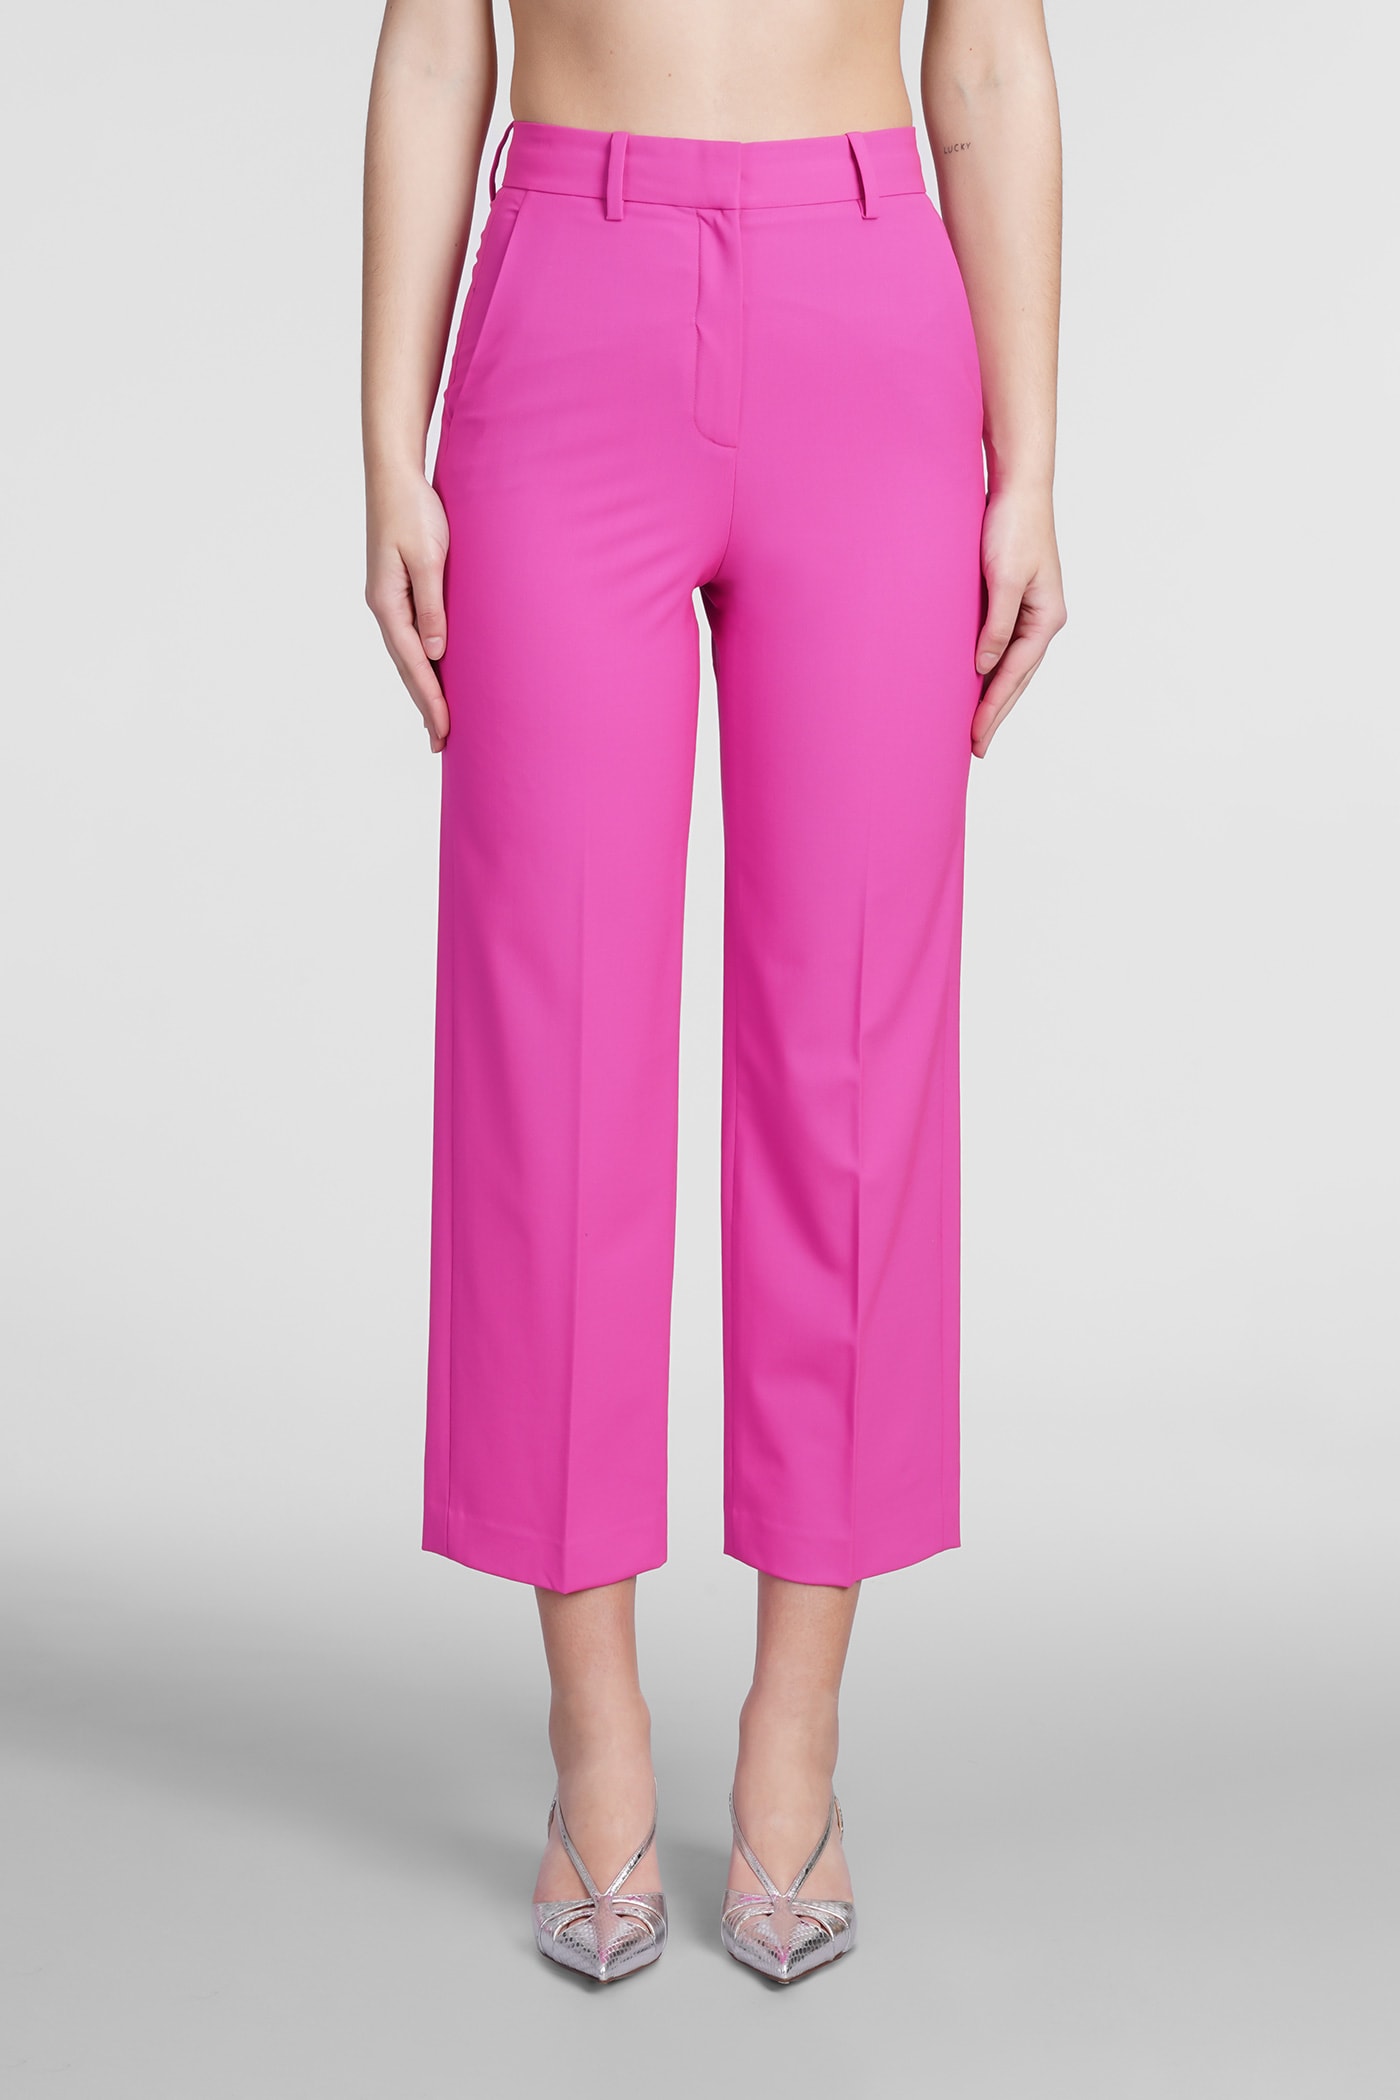 Theory + Demitria 2 Check Stretch-Wool Flared Pants